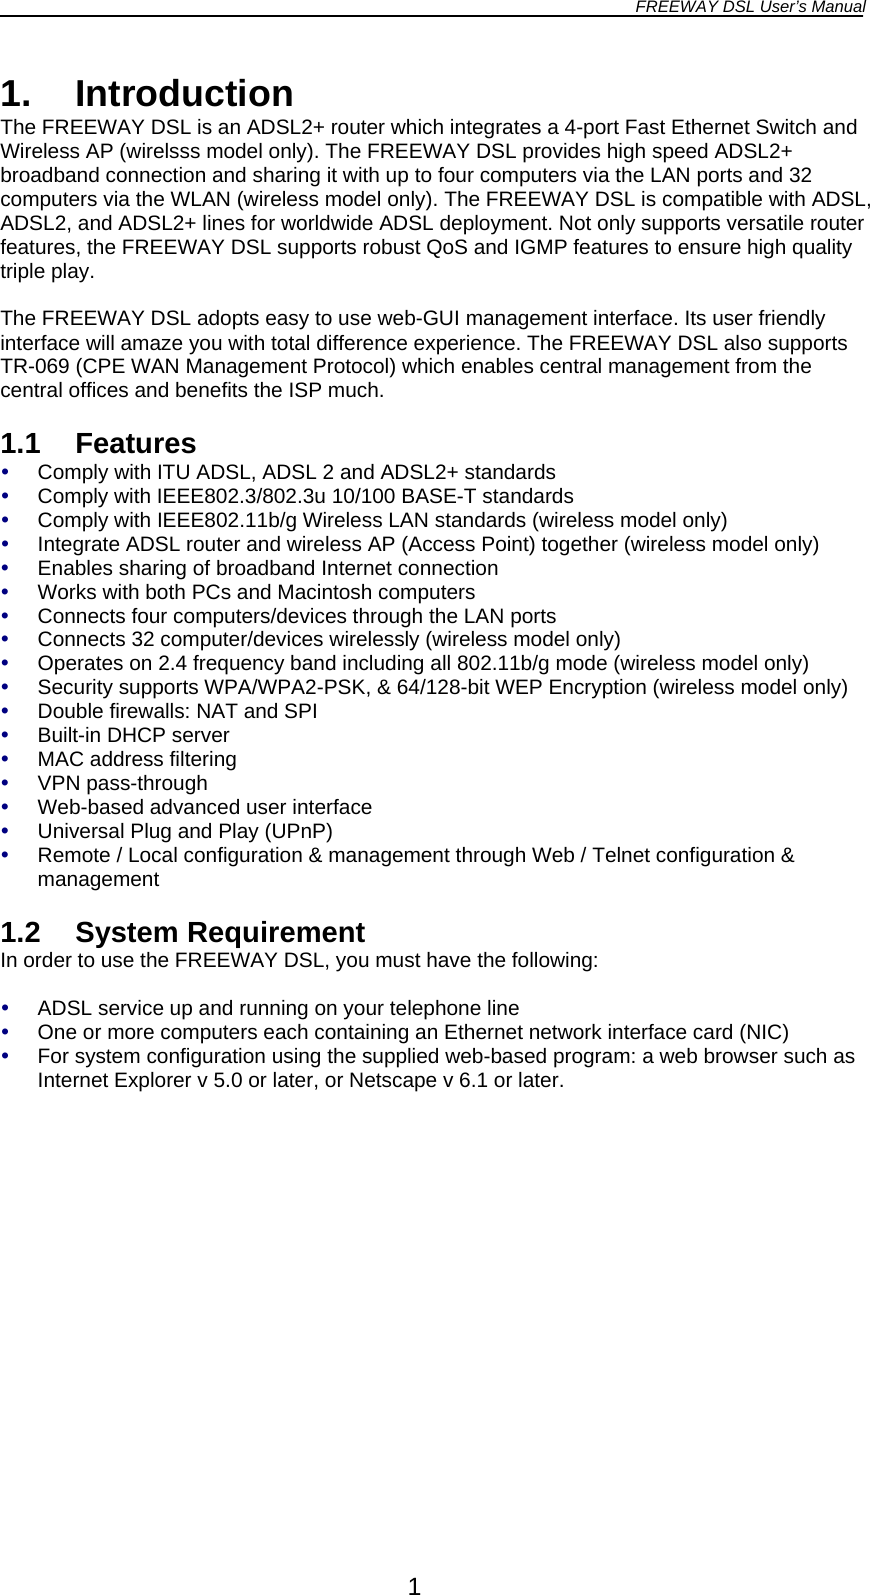 FREEWAY DSL User’s Manual  1. Introduction The FREEWAY DSL is an ADSL2+ router which integrates a 4-port Fast Ethernet Switch and Wireless AP (wirelsss model only). The FREEWAY DSL provides high speed ADSL2+ broadband connection and sharing it with up to four computers via the LAN ports and 32 computers via the WLAN (wireless model only). The FREEWAY DSL is compatible with ADSL, ADSL2, and ADSL2+ lines for worldwide ADSL deployment. Not only supports versatile router features, the FREEWAY DSL supports robust QoS and IGMP features to ensure high quality triple play.  The FREEWAY DSL adopts easy to use web-GUI management interface. Its user friendly interface will amaze you with total difference experience. The FREEWAY DSL also supports TR-069 (CPE WAN Management Protocol) which enables central management from the central offices and benefits the ISP much.  1.1 Features   Comply with ITU ADSL, ADSL 2 and ADSL2+ standards   Comply with IEEE802.3/802.3u 10/100 BASE-T standards   Comply with IEEE802.11b/g Wireless LAN standards (wireless model only)   Integrate ADSL router and wireless AP (Access Point) together (wireless model only)   Enables sharing of broadband Internet connection   Works with both PCs and Macintosh computers   Connects four computers/devices through the LAN ports   Connects 32 computer/devices wirelessly (wireless model only)   Operates on 2.4 frequency band including all 802.11b/g mode (wireless model only)   Security supports WPA/WPA2-PSK, &amp; 64/128-bit WEP Encryption (wireless model only)   Double firewalls: NAT and SPI   Built-in DHCP server   MAC address filtering   VPN pass-through   Web-based advanced user interface   Universal Plug and Play (UPnP)   Remote / Local configuration &amp; management through Web / Telnet configuration &amp; management  1.2 System Requirement In order to use the FREEWAY DSL, you must have the following:    ADSL service up and running on your telephone line   One or more computers each containing an Ethernet network interface card (NIC)   For system configuration using the supplied web-based program: a web browser such as Internet Explorer v 5.0 or later, or Netscape v 6.1 or later.  1 